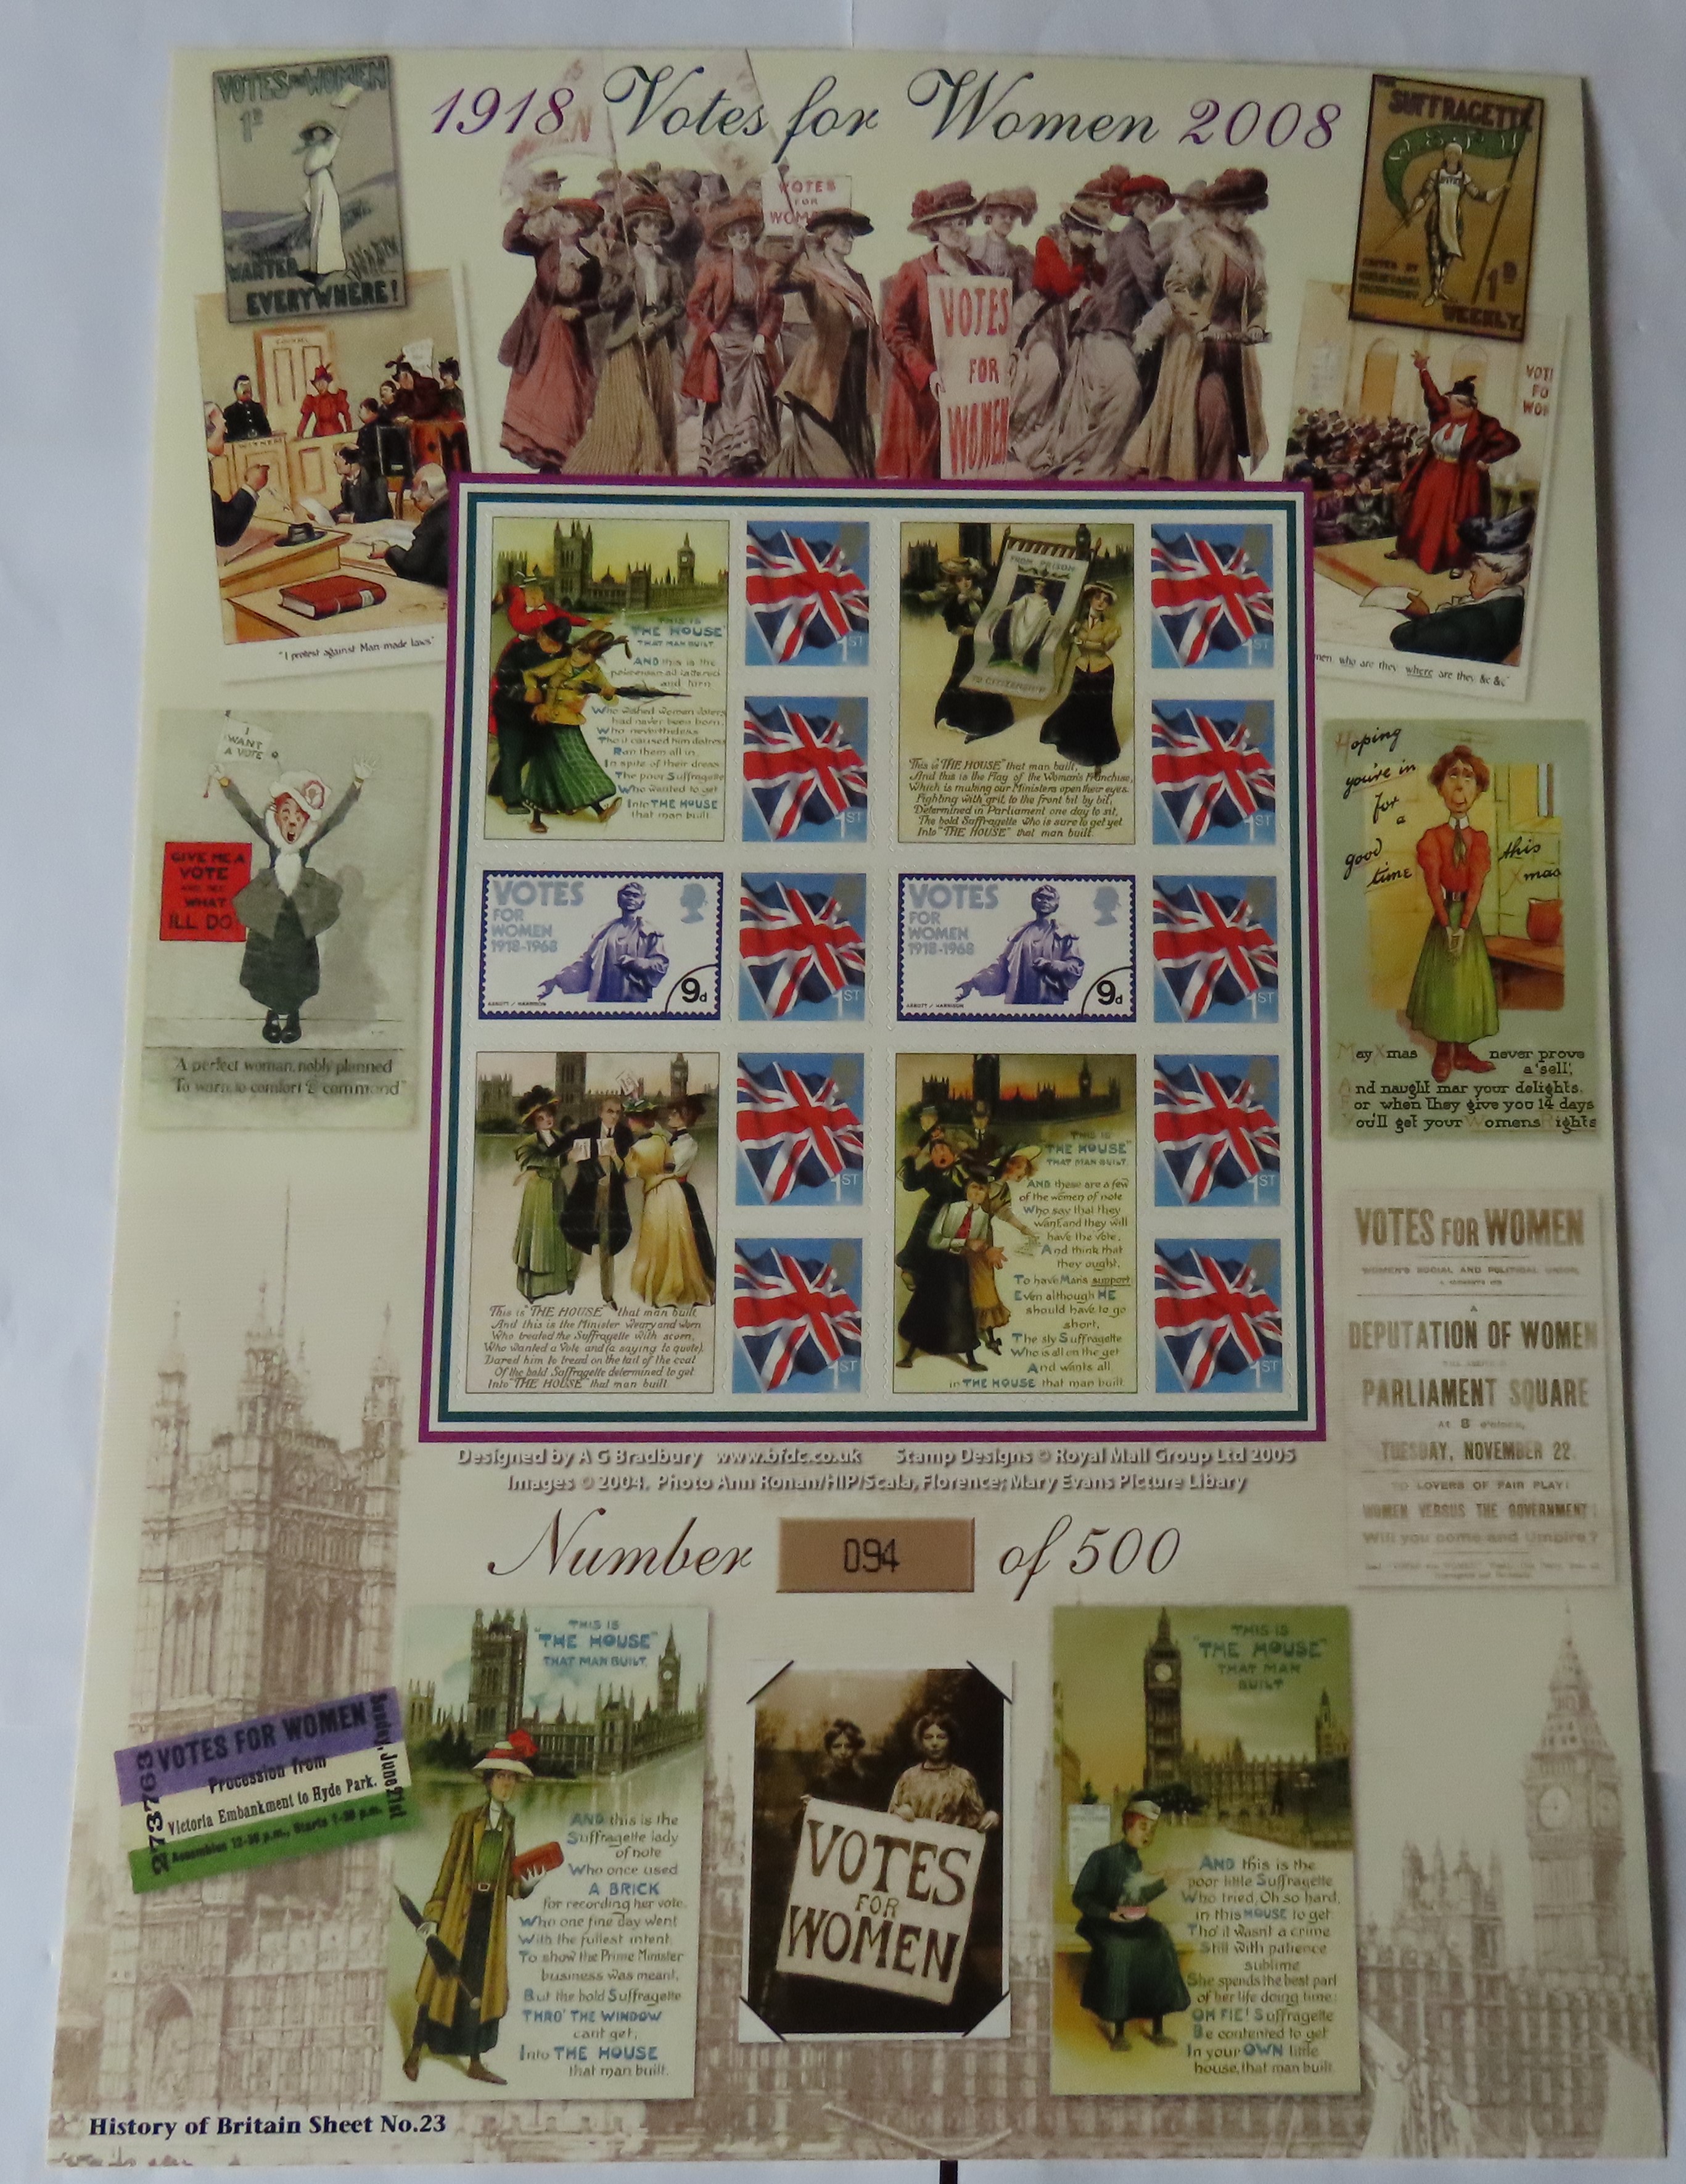 GB 2008 Votes for Women 1918 -2008, Royal Mail / Bradbury History of Britain Sheet. 10 first-class